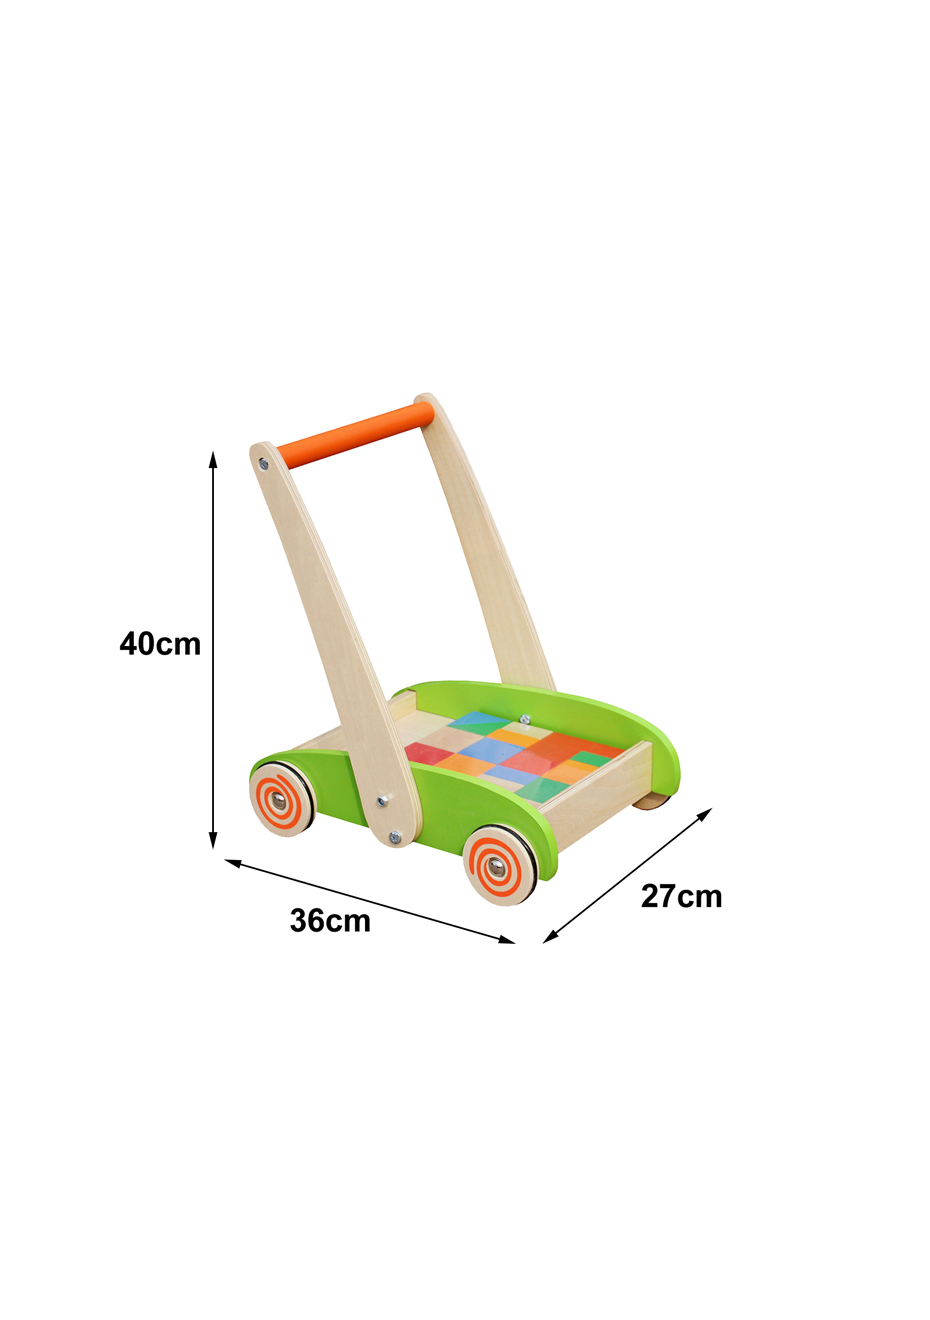 childs wooden trolley